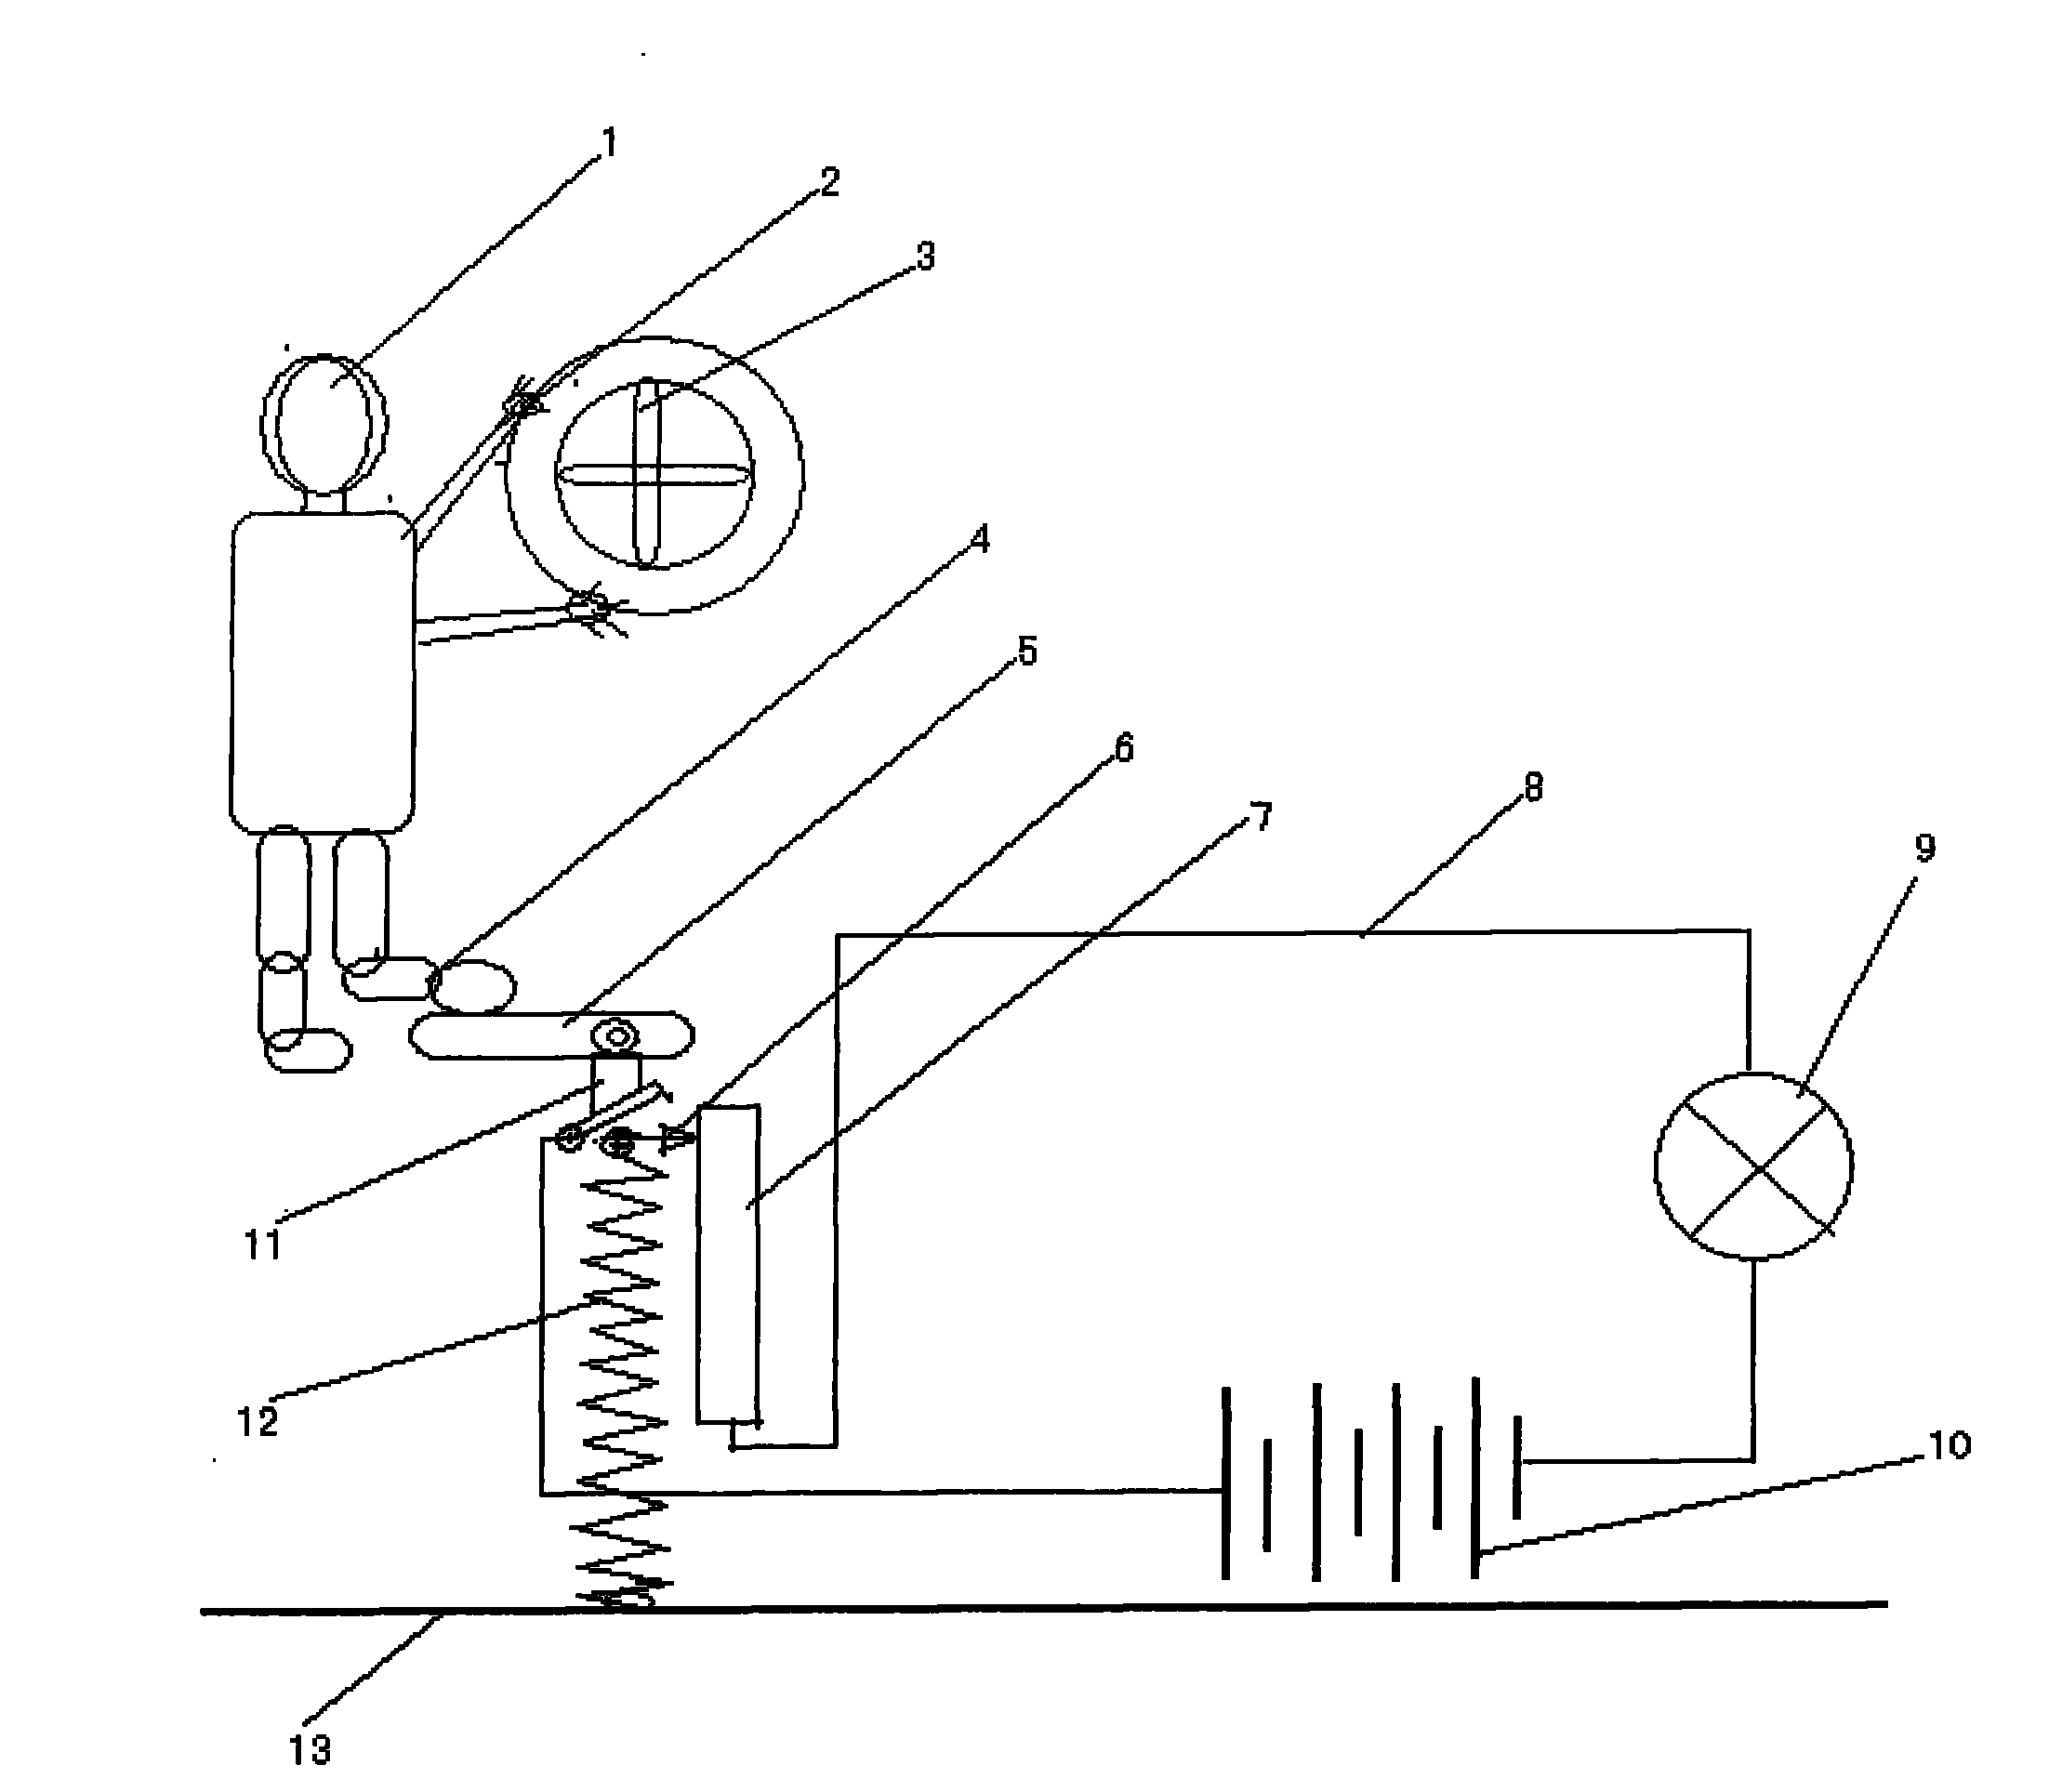 Fast and slow brake device with strong and weak brake lamplight alarm for motor vehicle